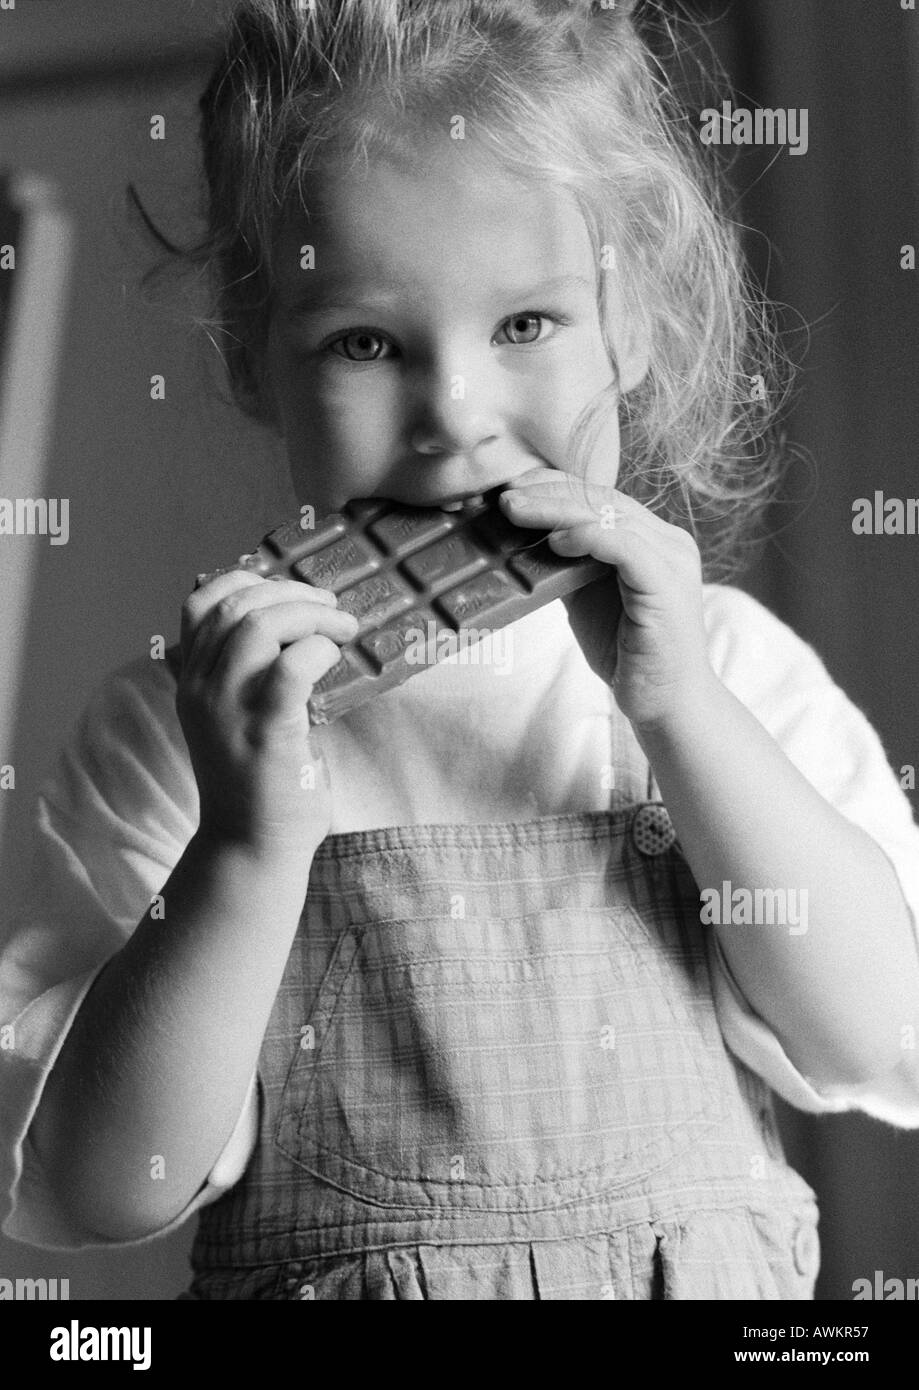 Girl eating chocolate bar, b&w Banque D'Images